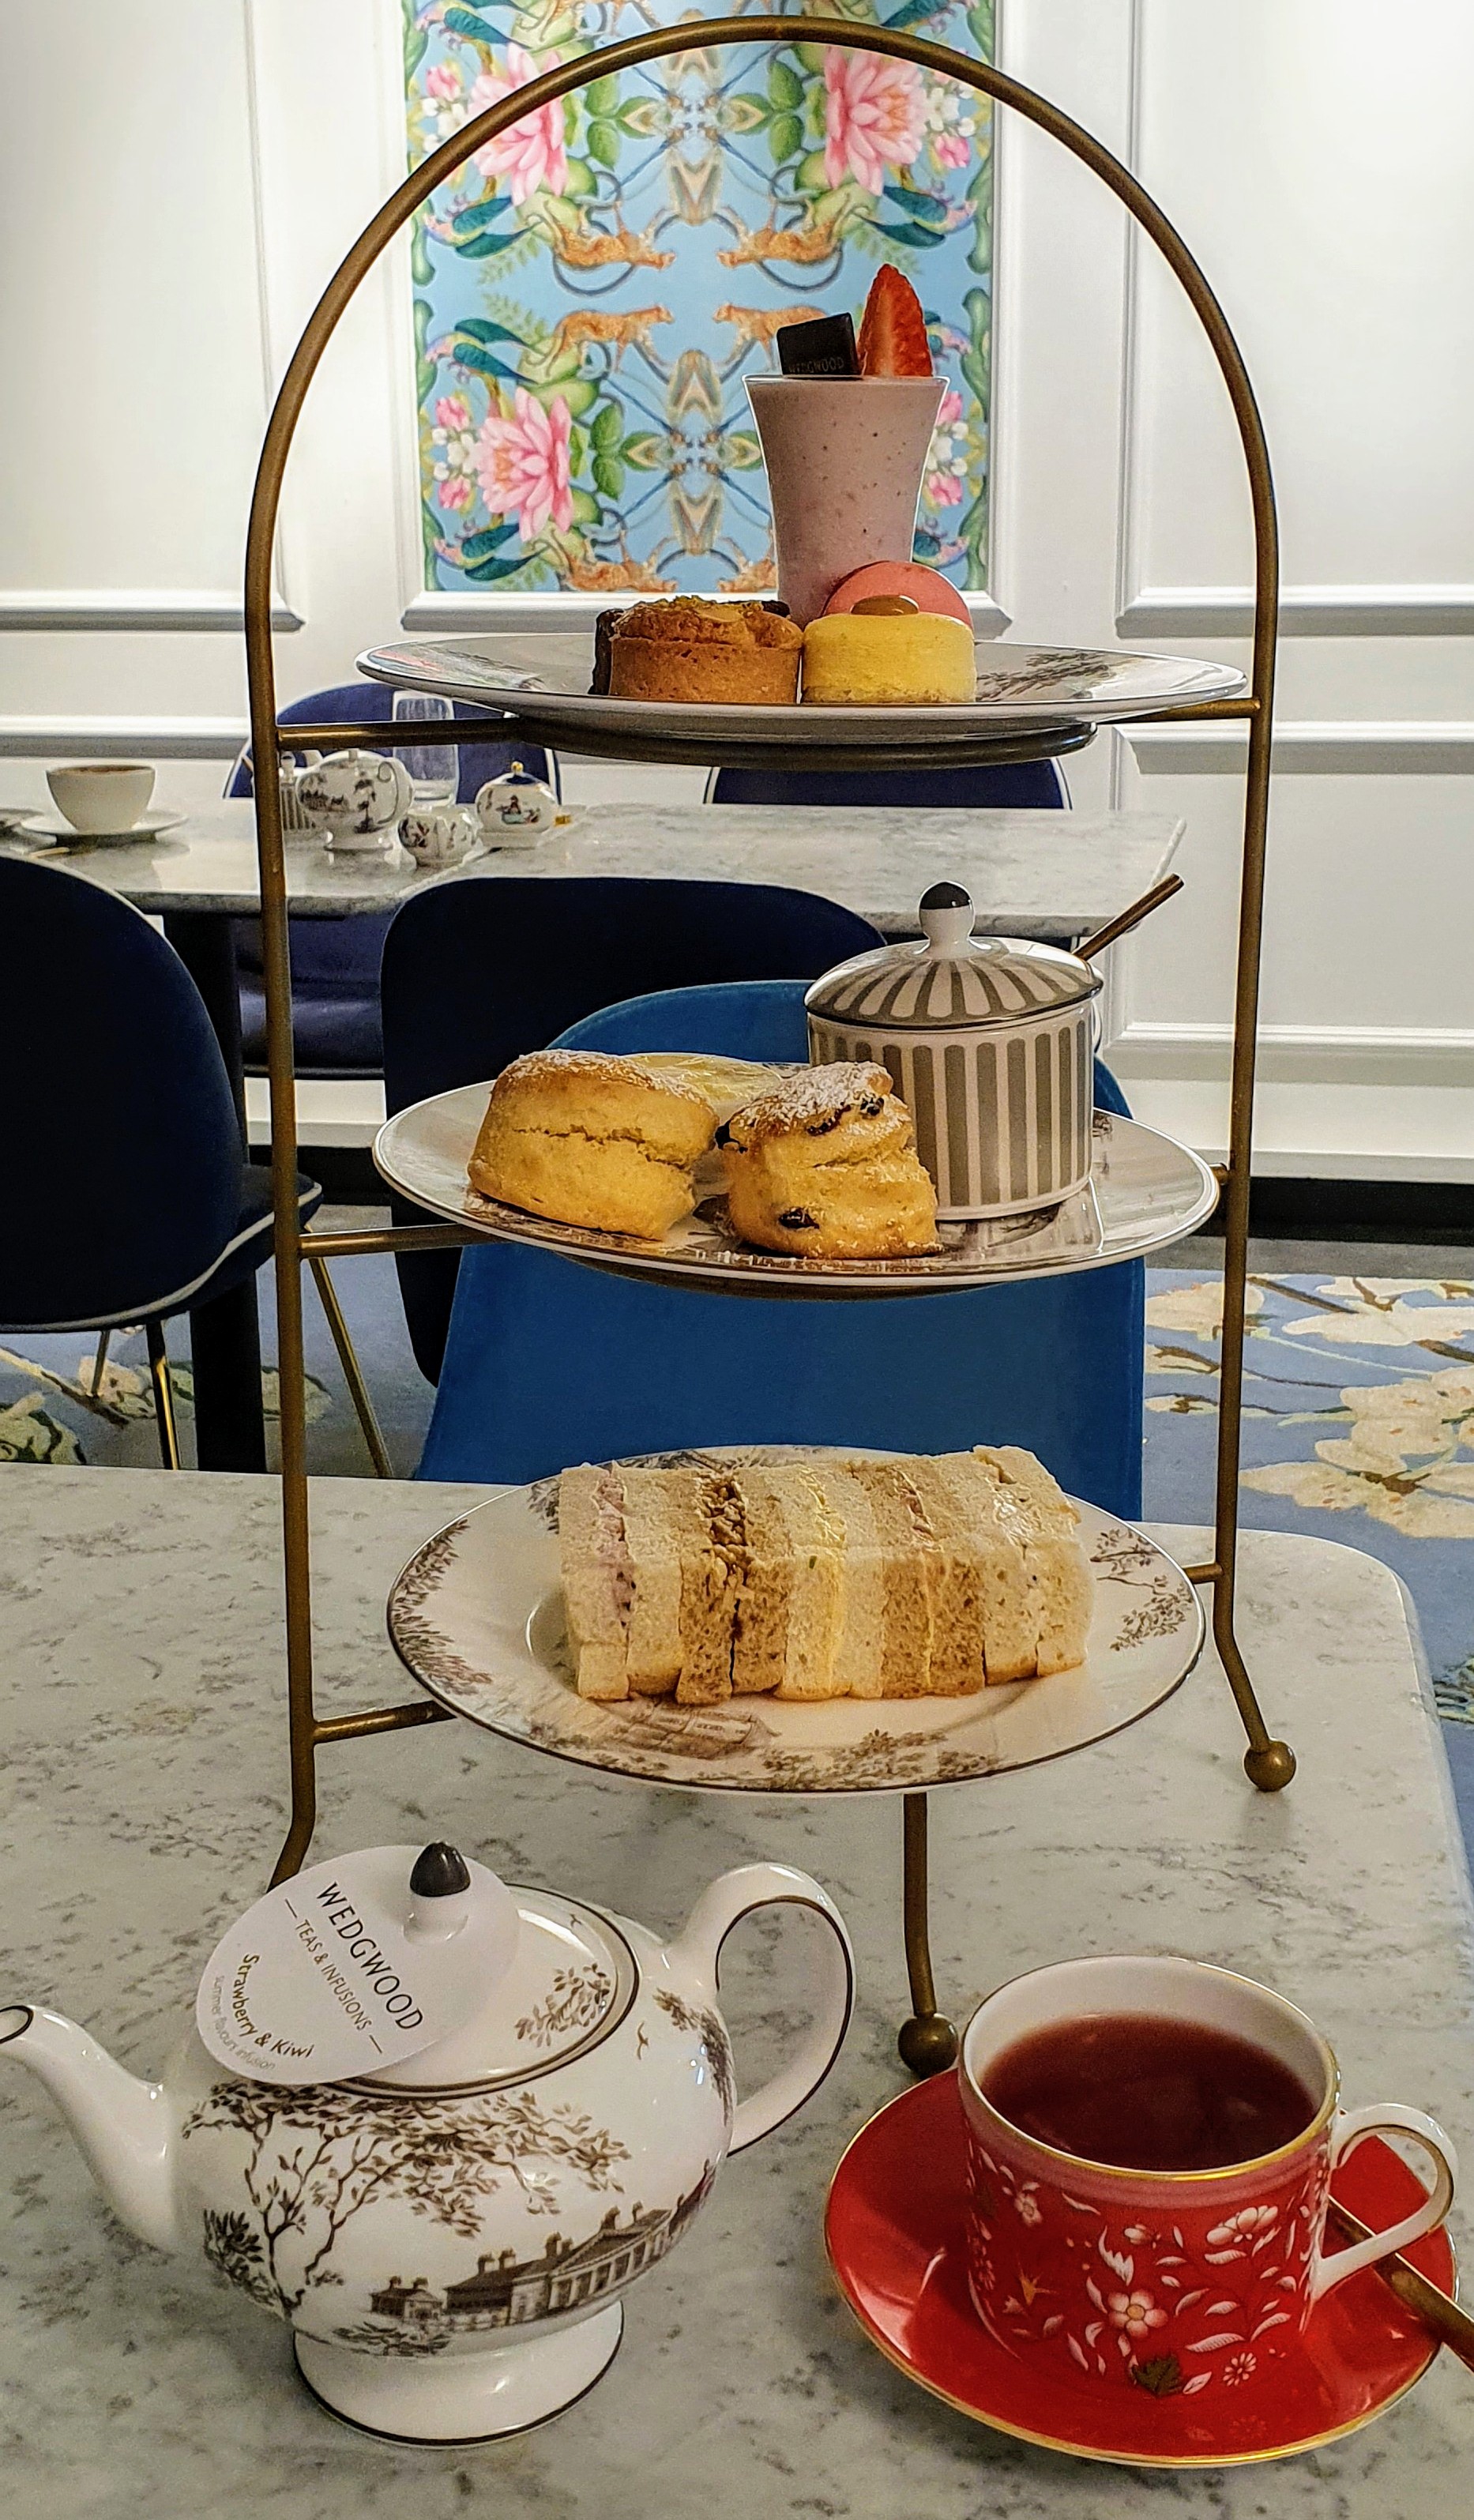 wedgwood factory tour and afternoon tea cost